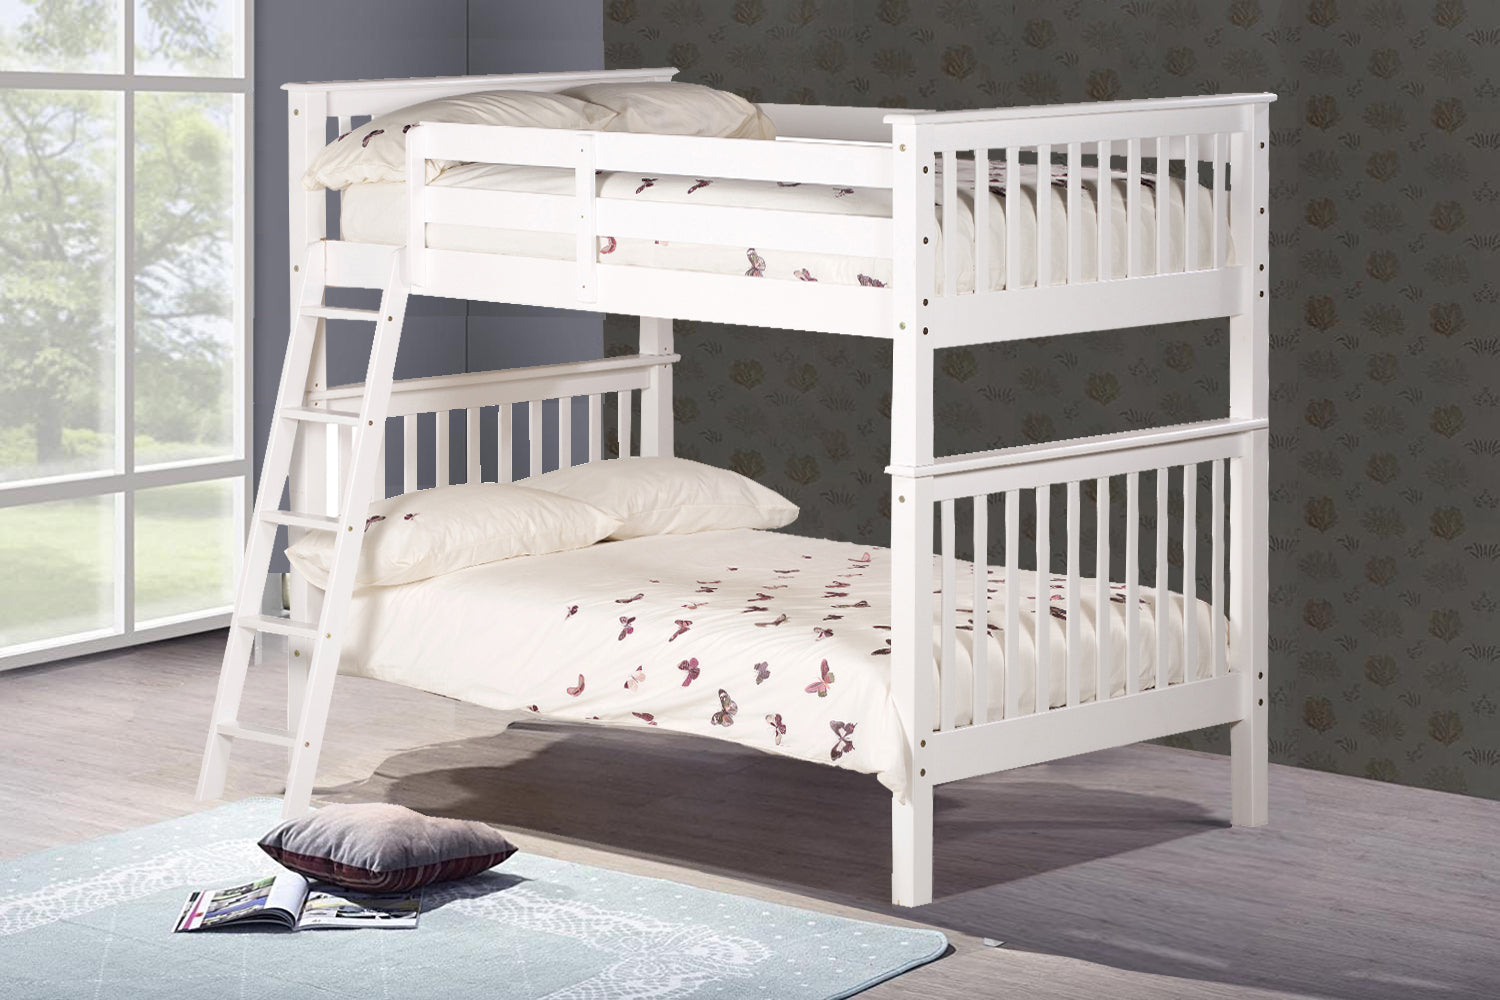 Better Alice Bunk Bed From Side-Better Bed Company